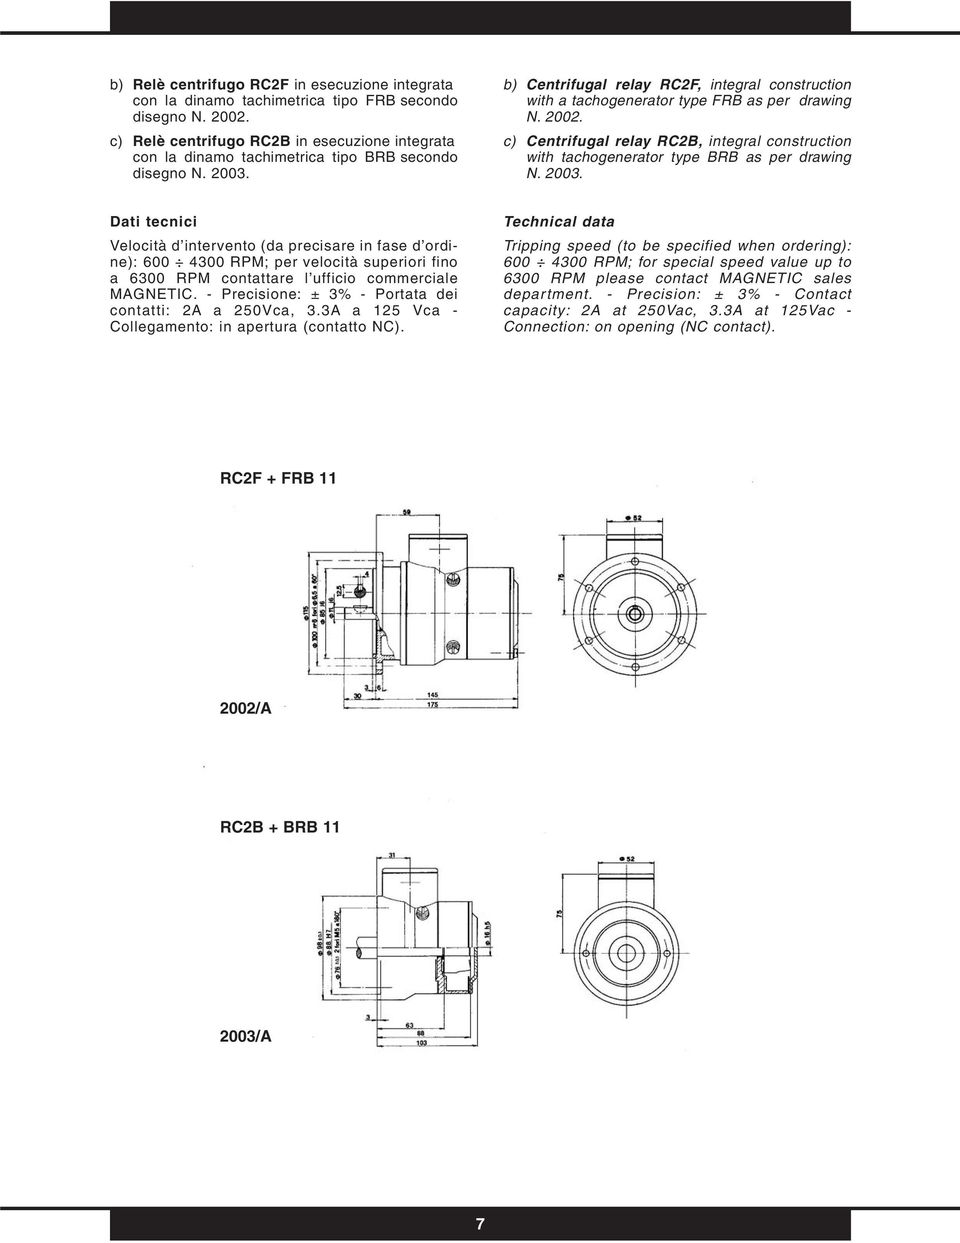 b) Centrifugal relay RC2F, integral construction with a tachogenerator type FRB as per drawing N. 2002. c) Centrifugal relay RC2B, integral construction with tachogenerator type BRB as per drawing N.